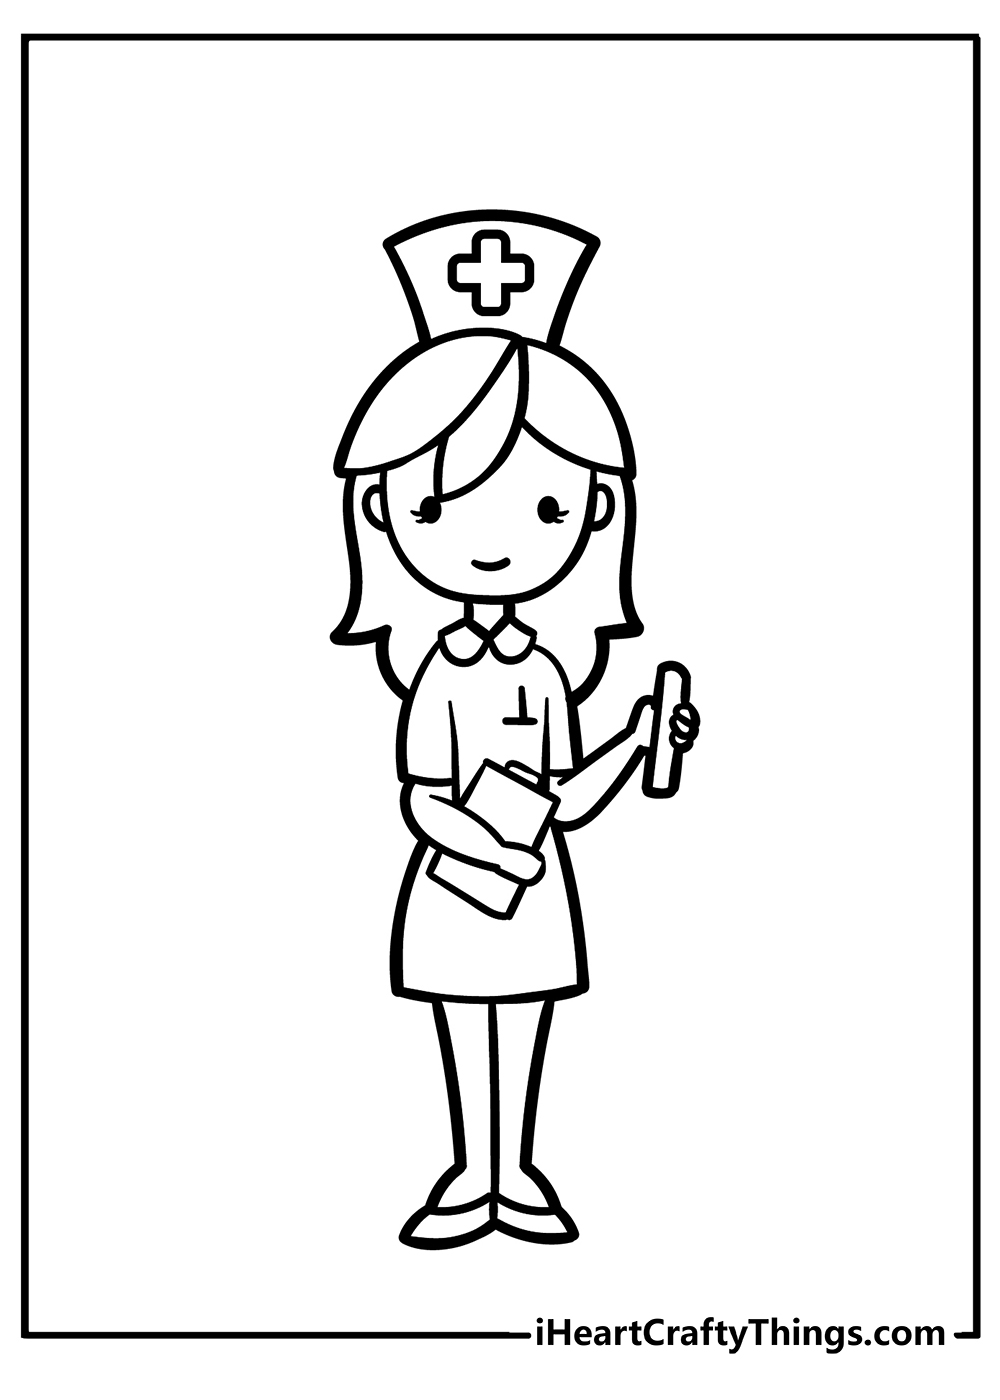 Nurse Coloring Pages for preschoolers free printable